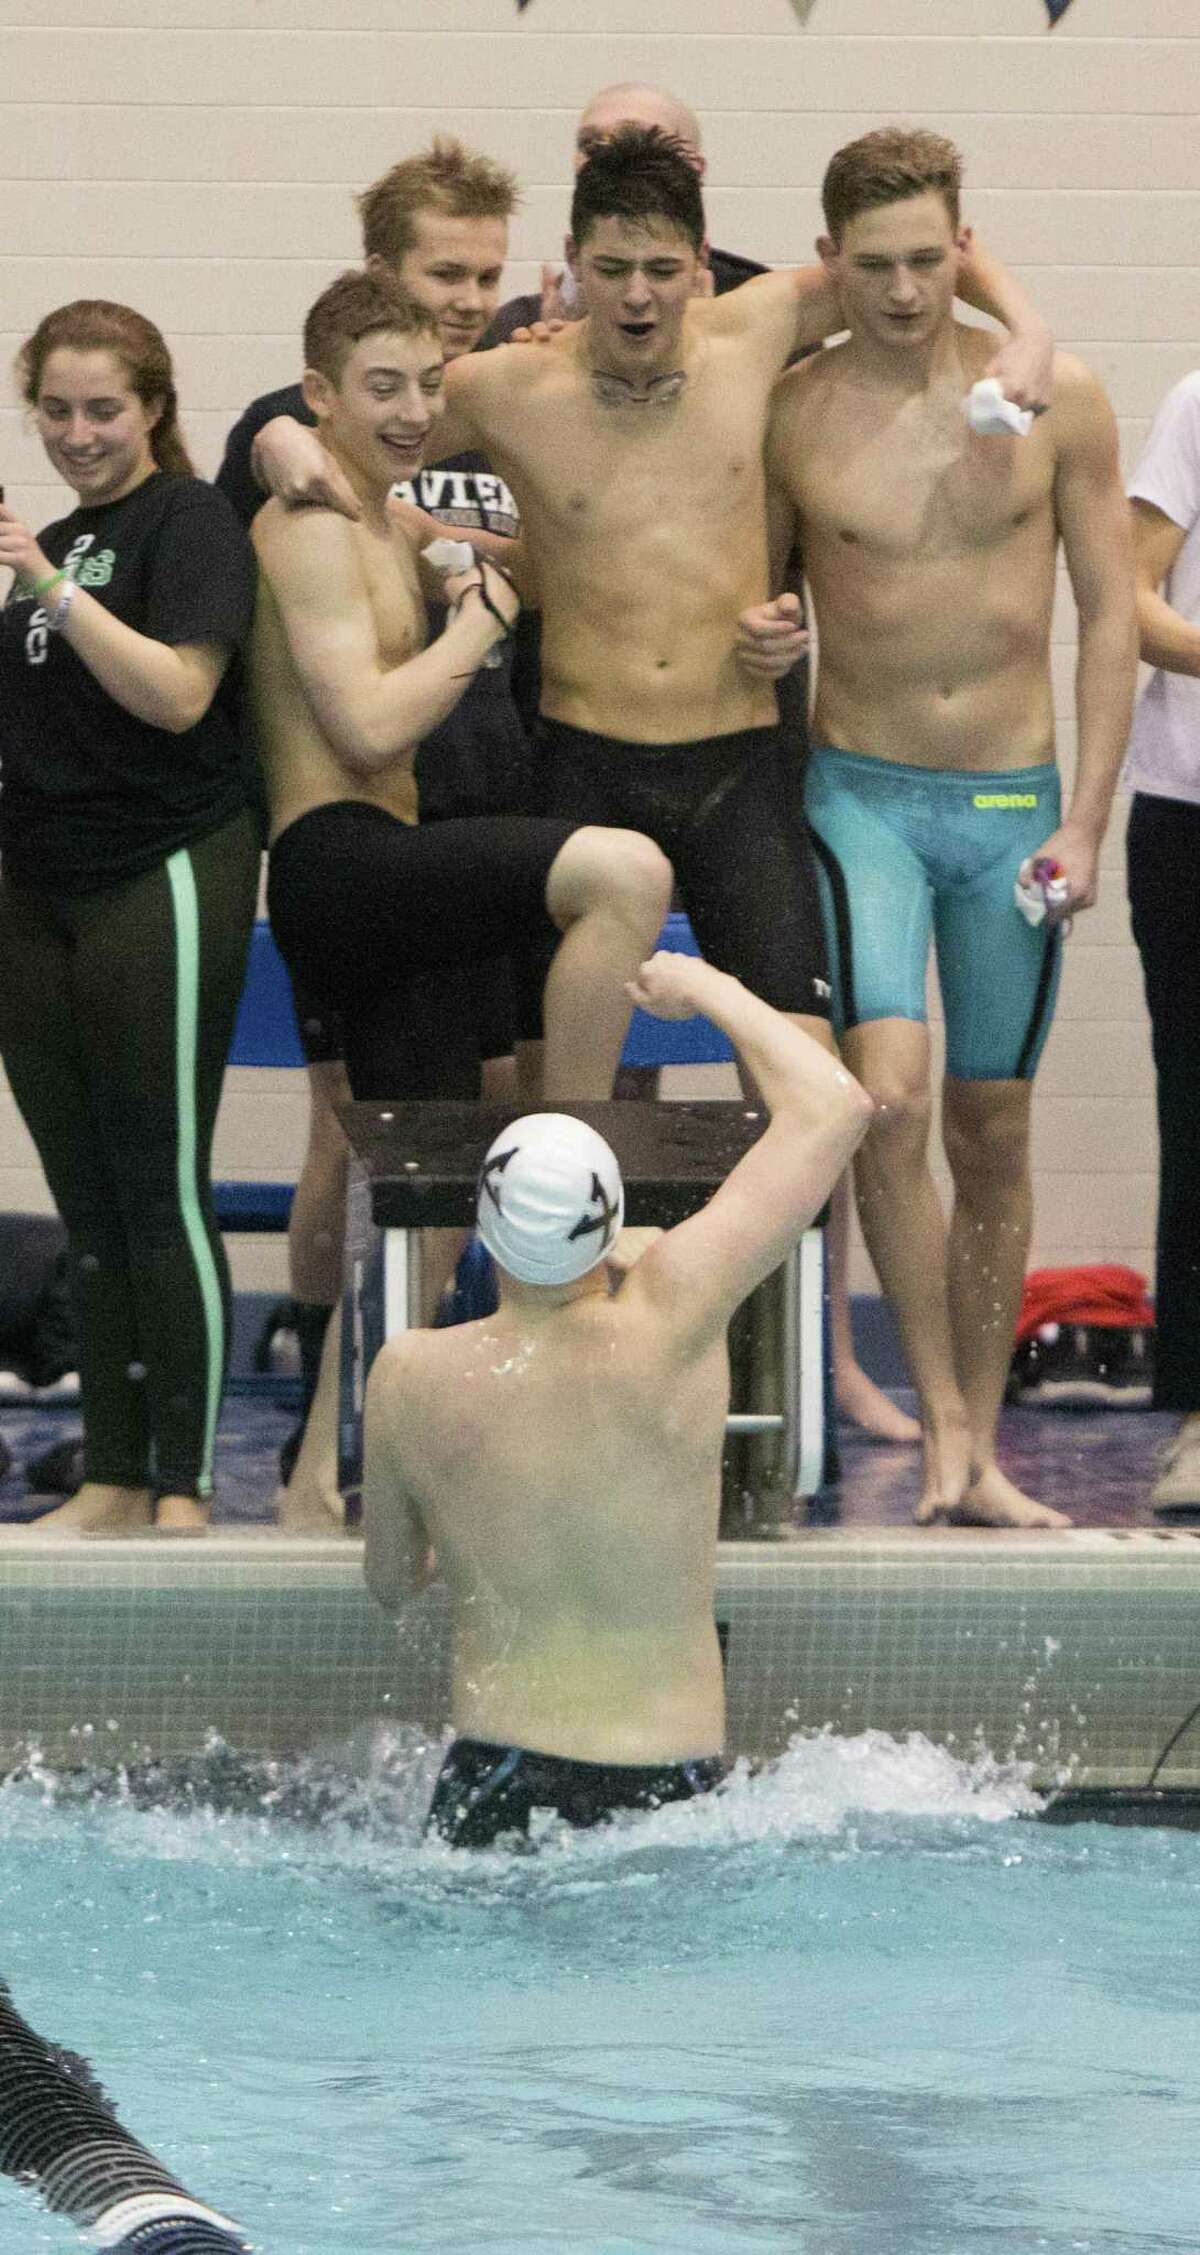 (John Vanacore/For Hearst Connecticut Media) Team members of the Xavier 200 yard medley relay team celelbrate their Class L stat championship Monday night.